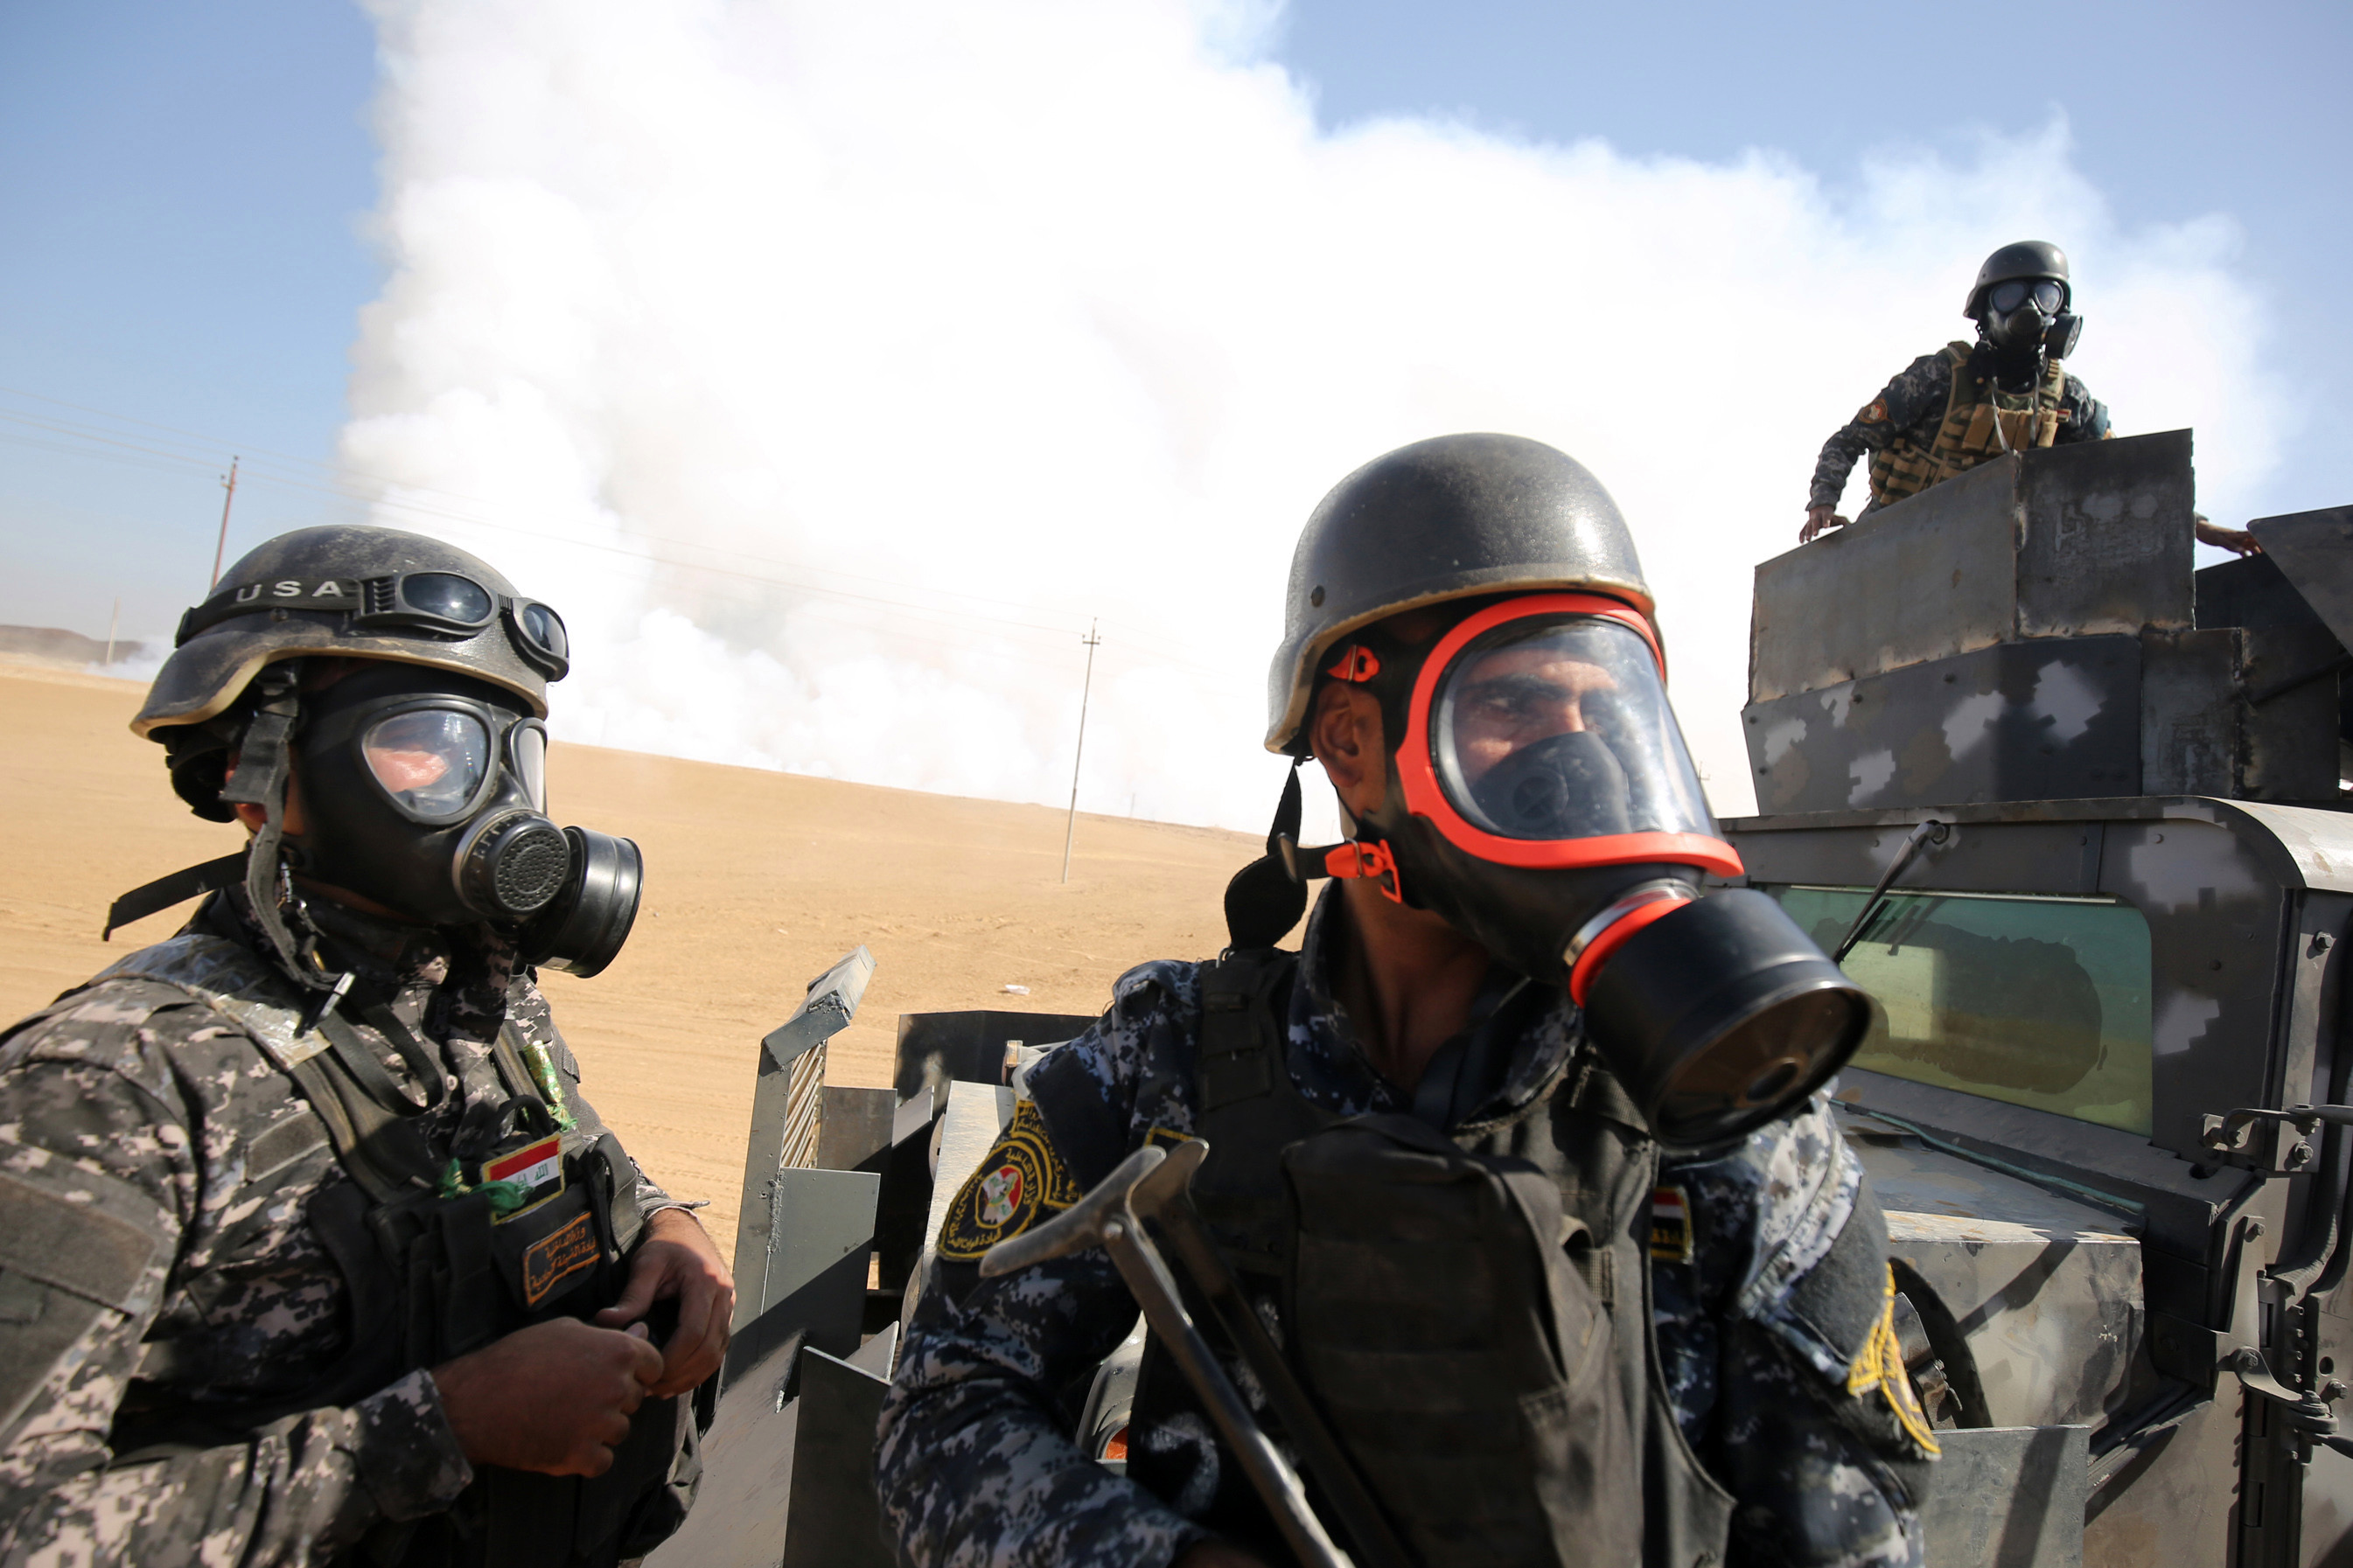 US, Australian Advisers And Iraqi Troops Came Under ISIS Chemical Attack In Mosul